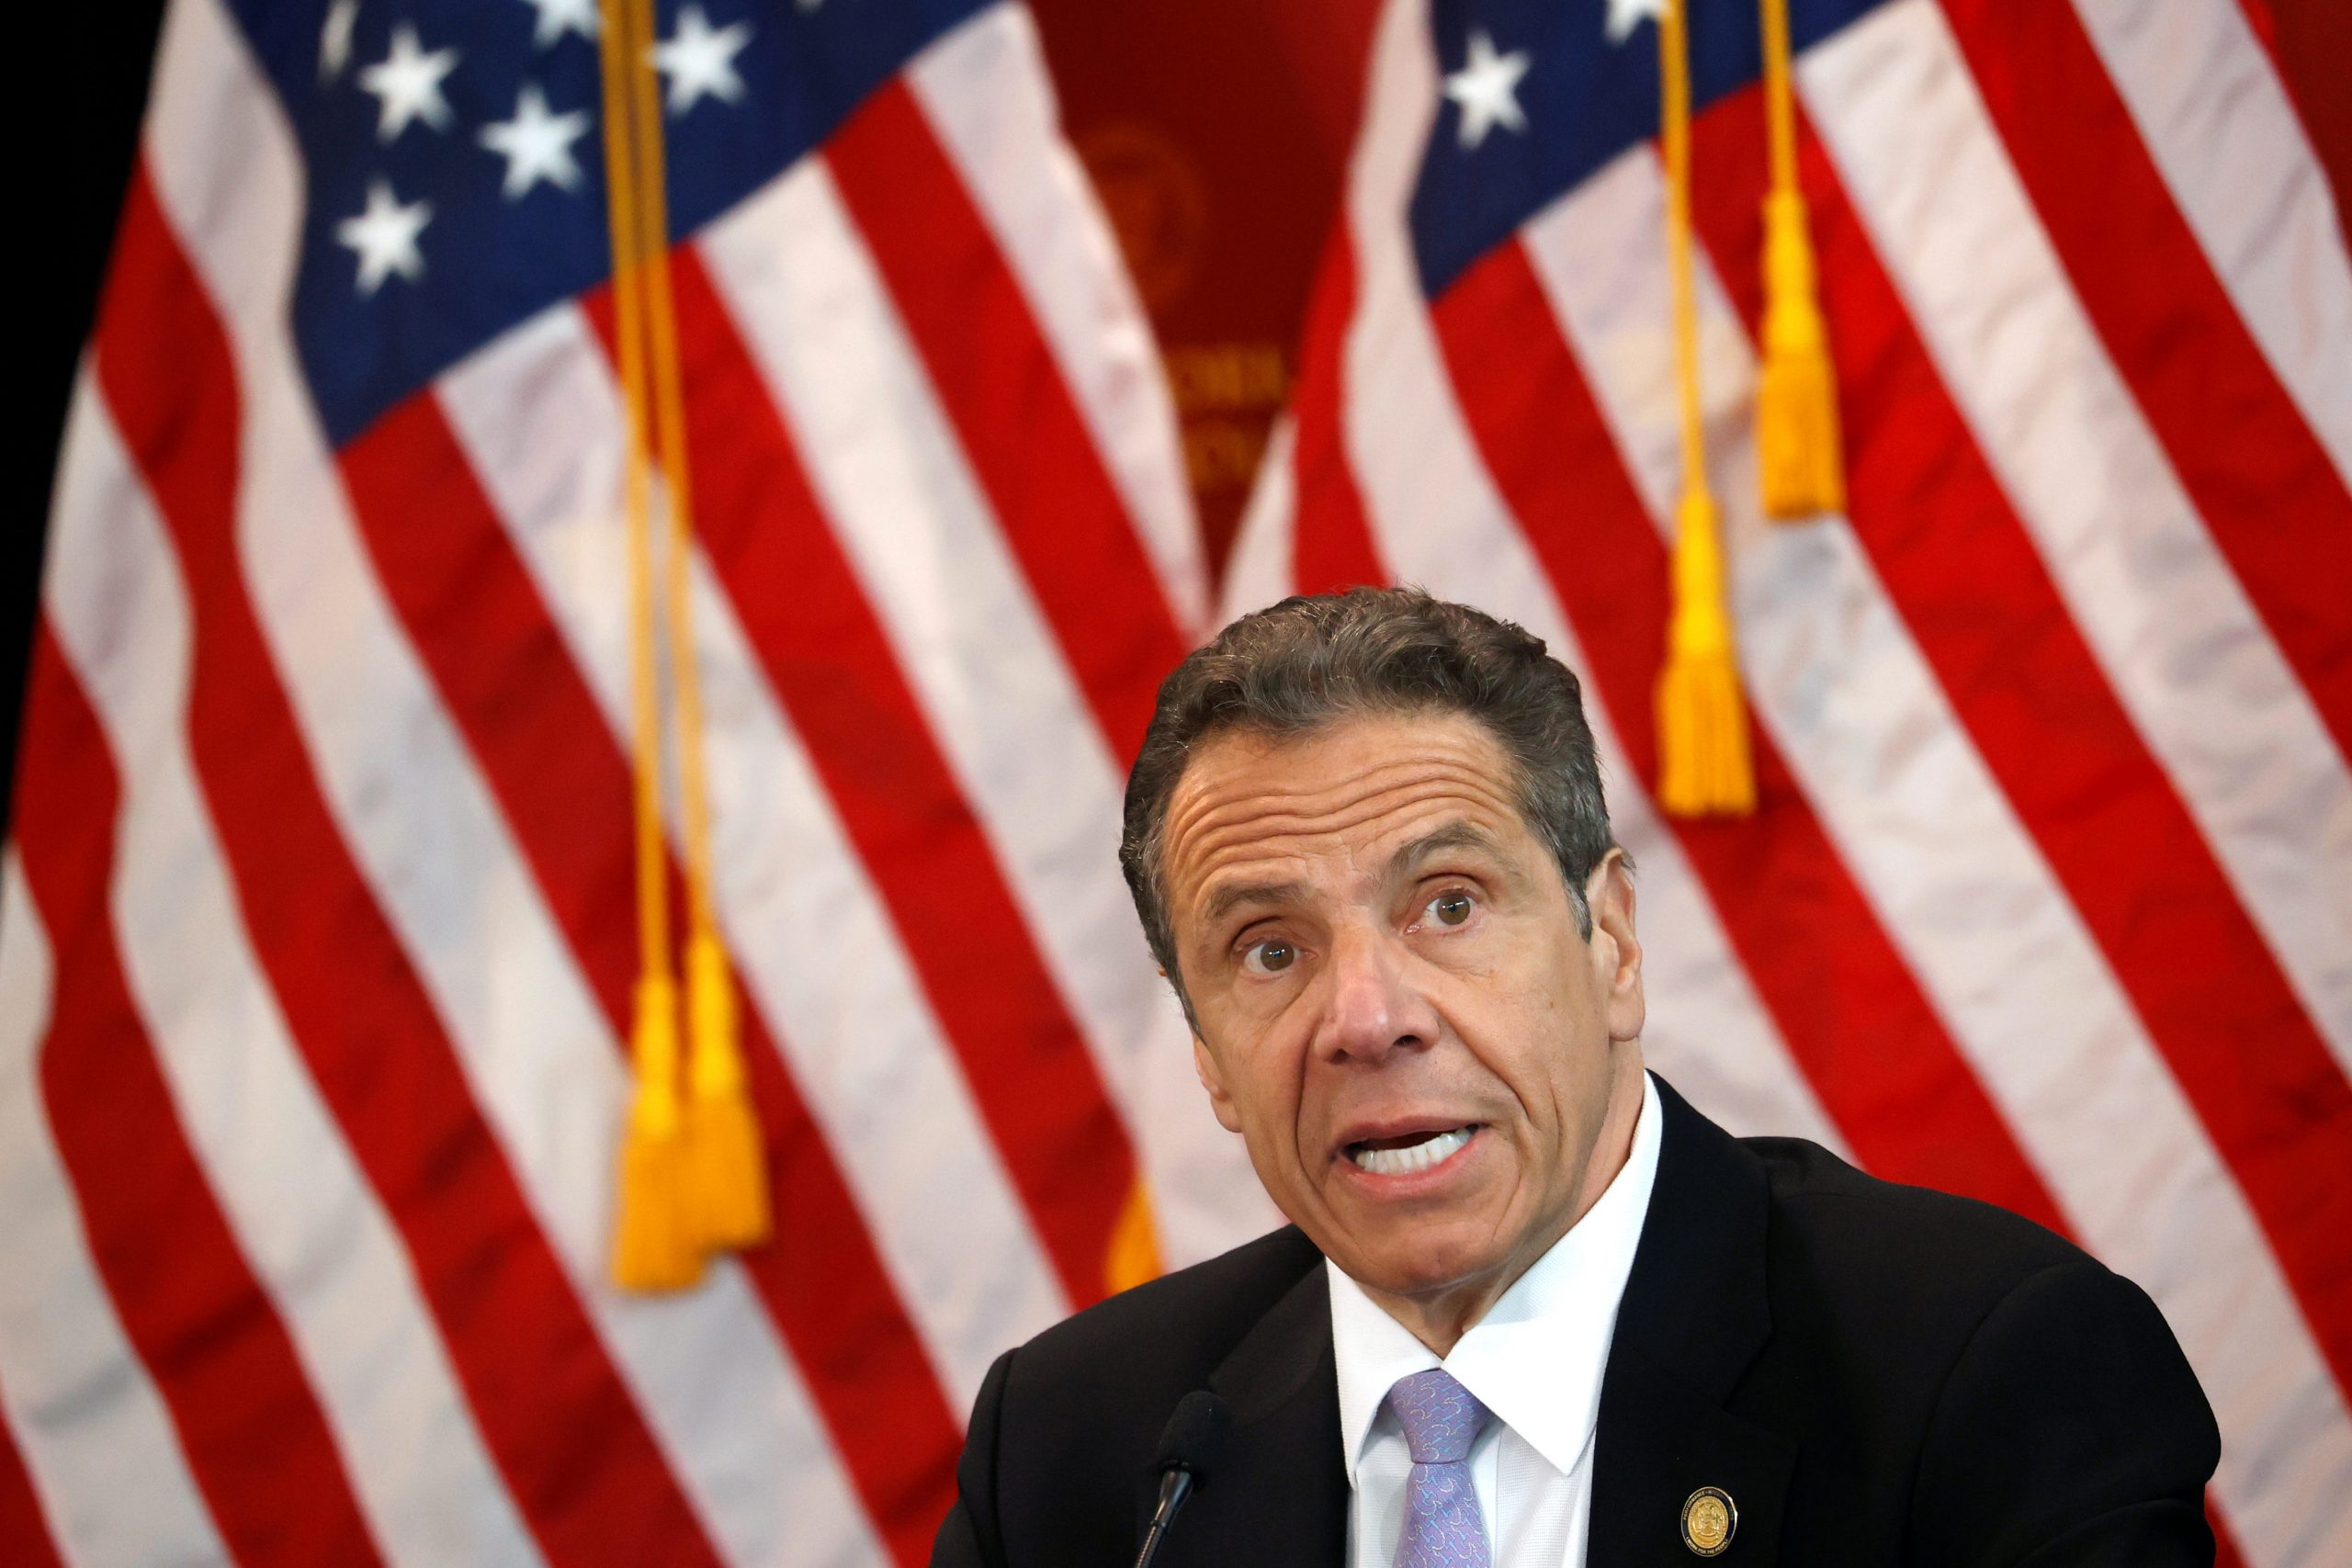 FILE PHOTO: New York Governor Andrew Cuomo speaks at his daily briefing at New York Medical College during the outbreak of the coronavirus disease (COVID-19) in Valhalla, New York, U.S., May 7, 2020. REUTERS/Mike Segar